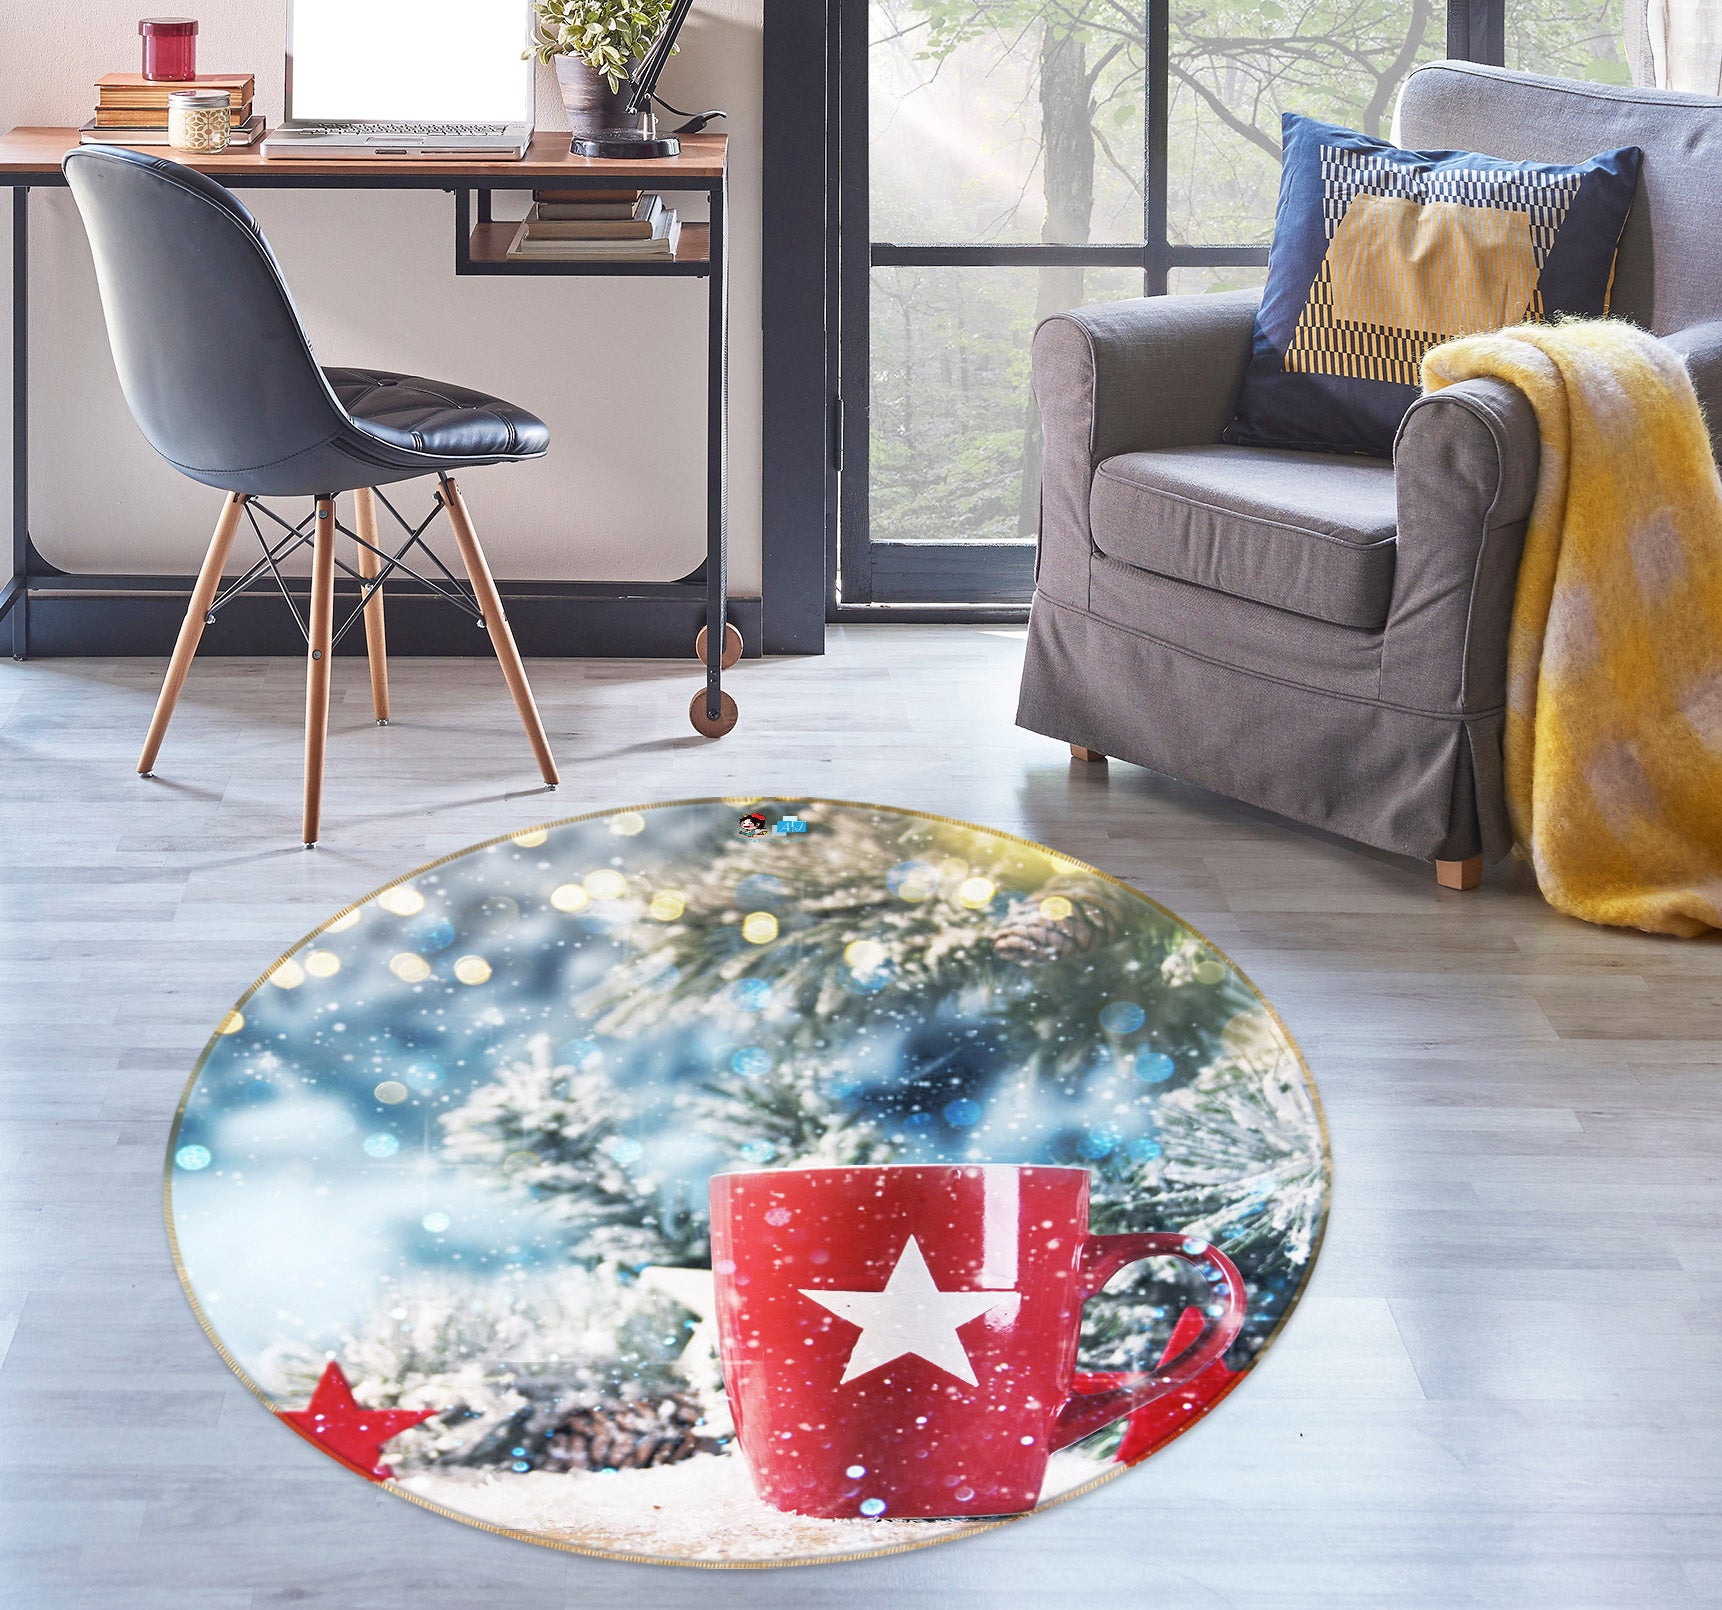 3D Red Cup 55203 Christmas Round Non Slip Rug Mat Xmas